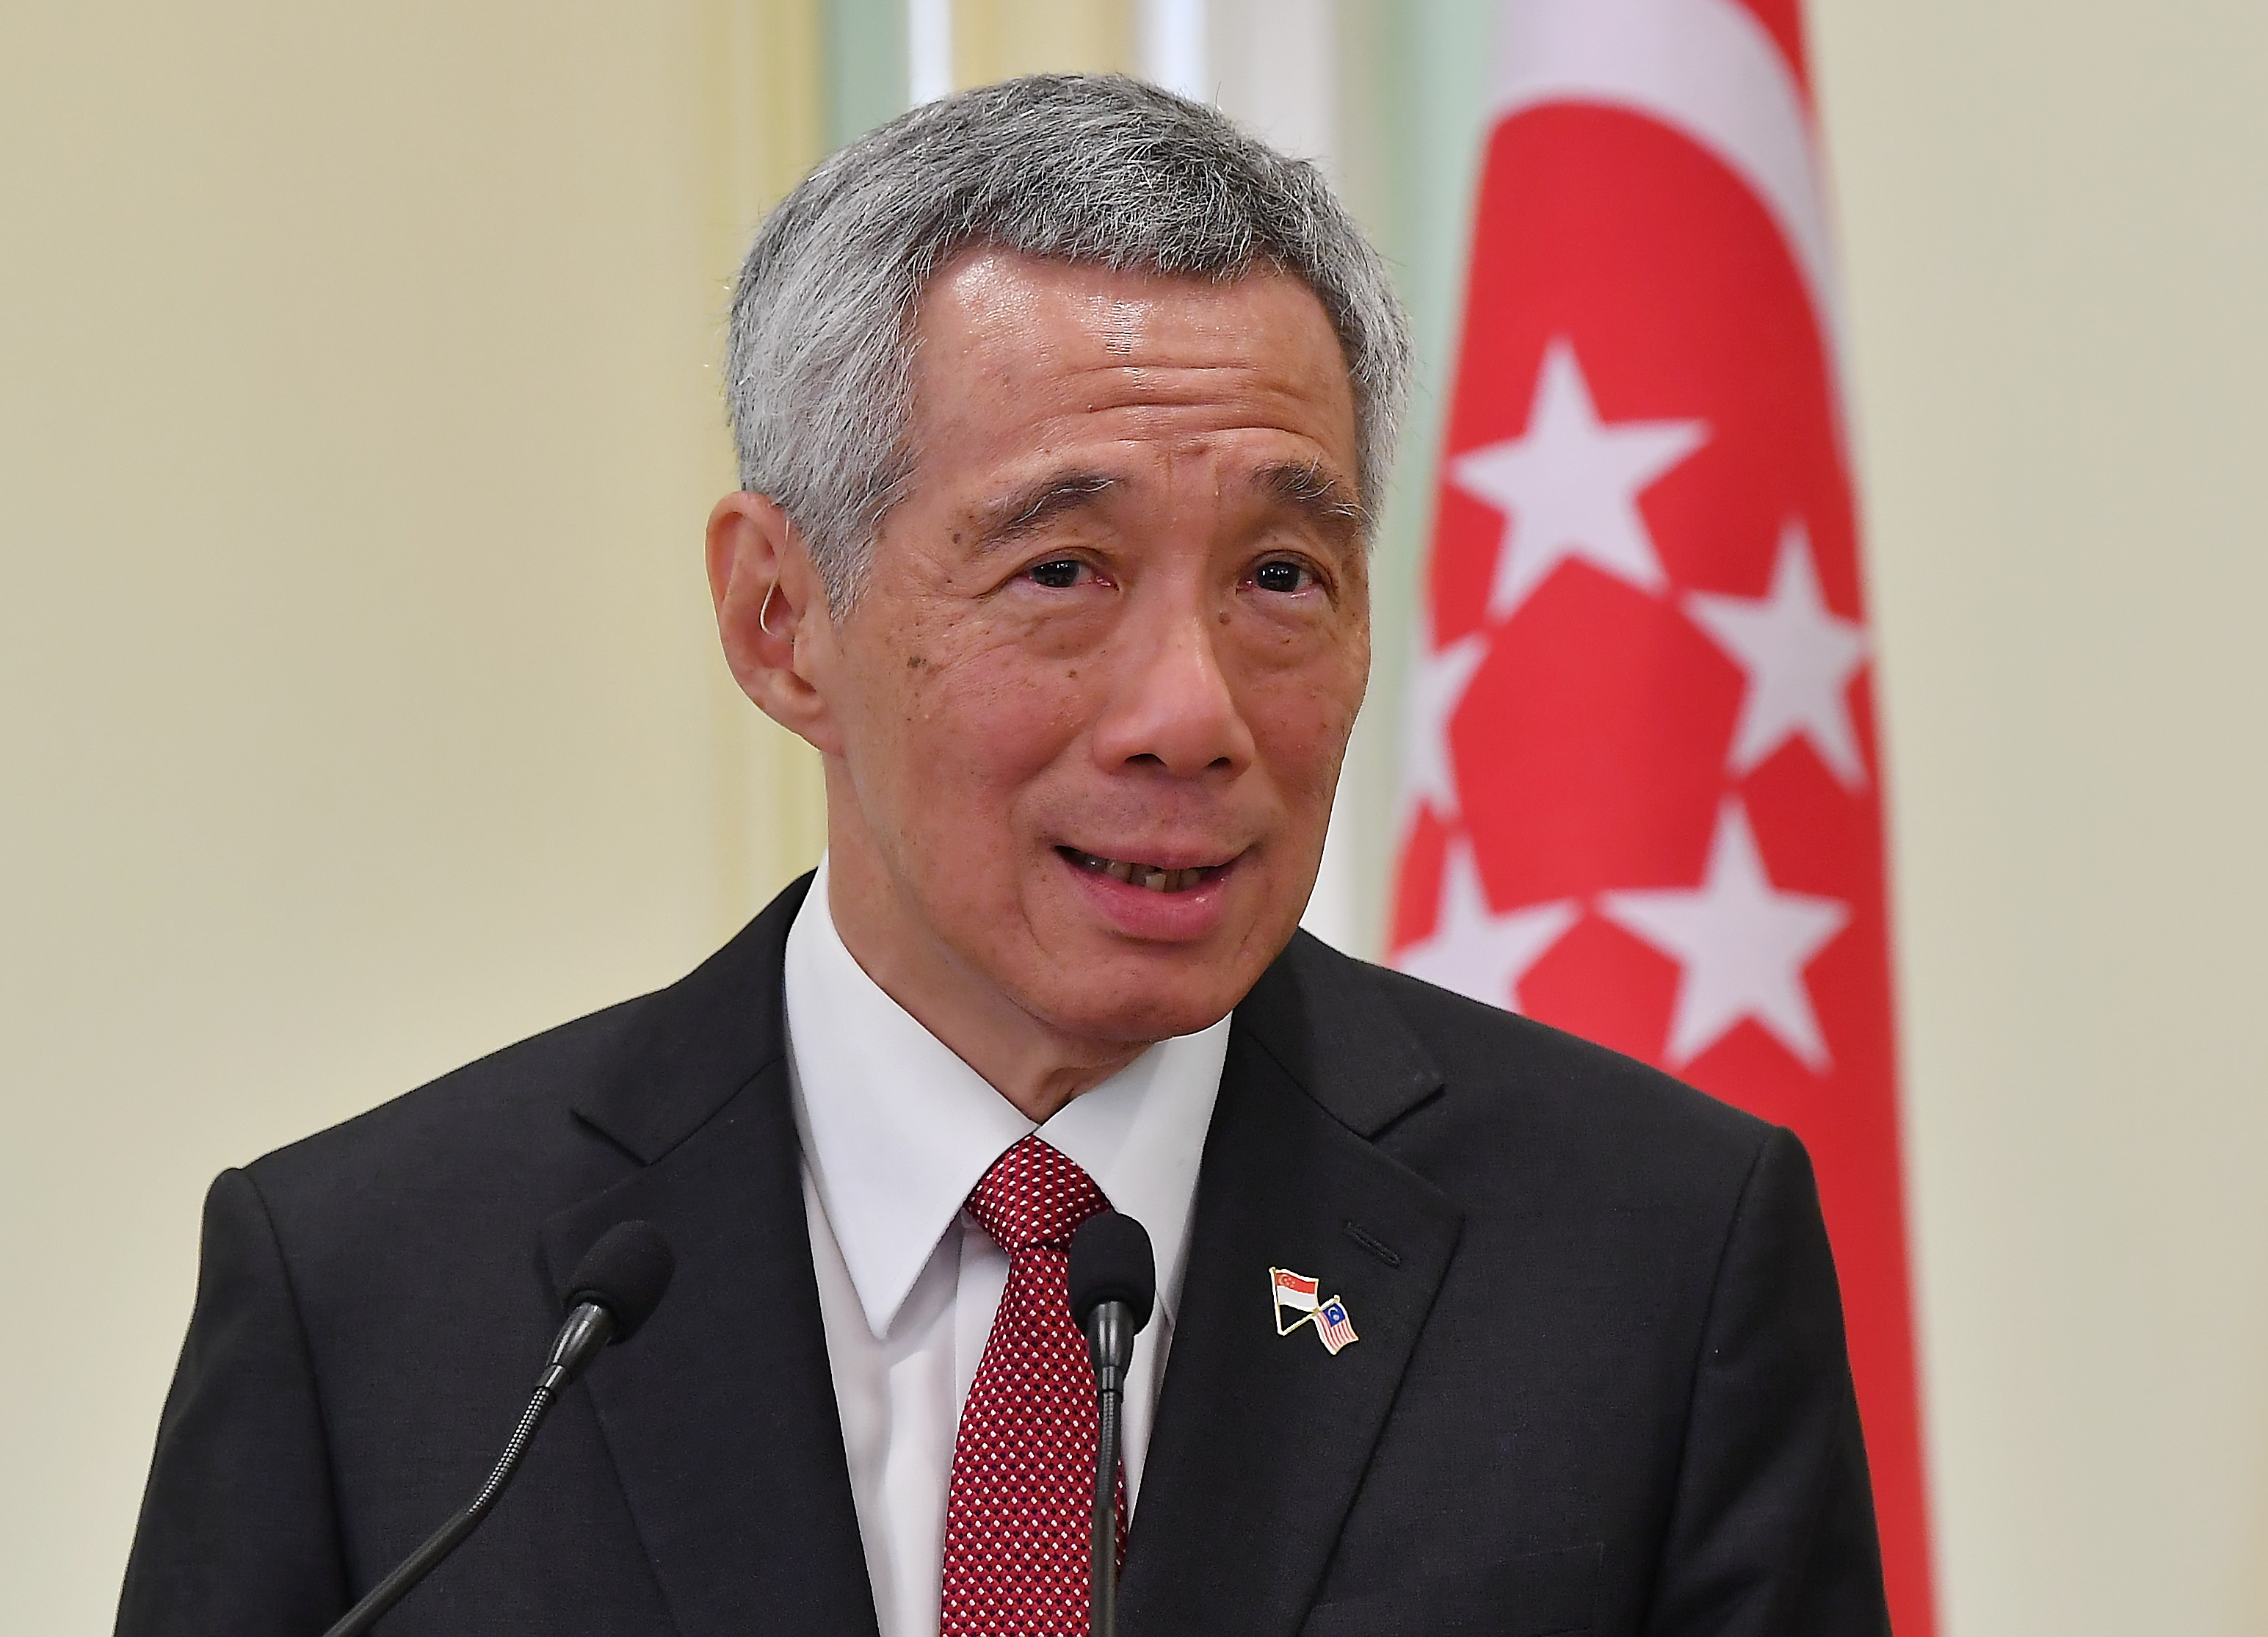 Biden’s admin likely to have multilateral approach in trade – Singapore PM